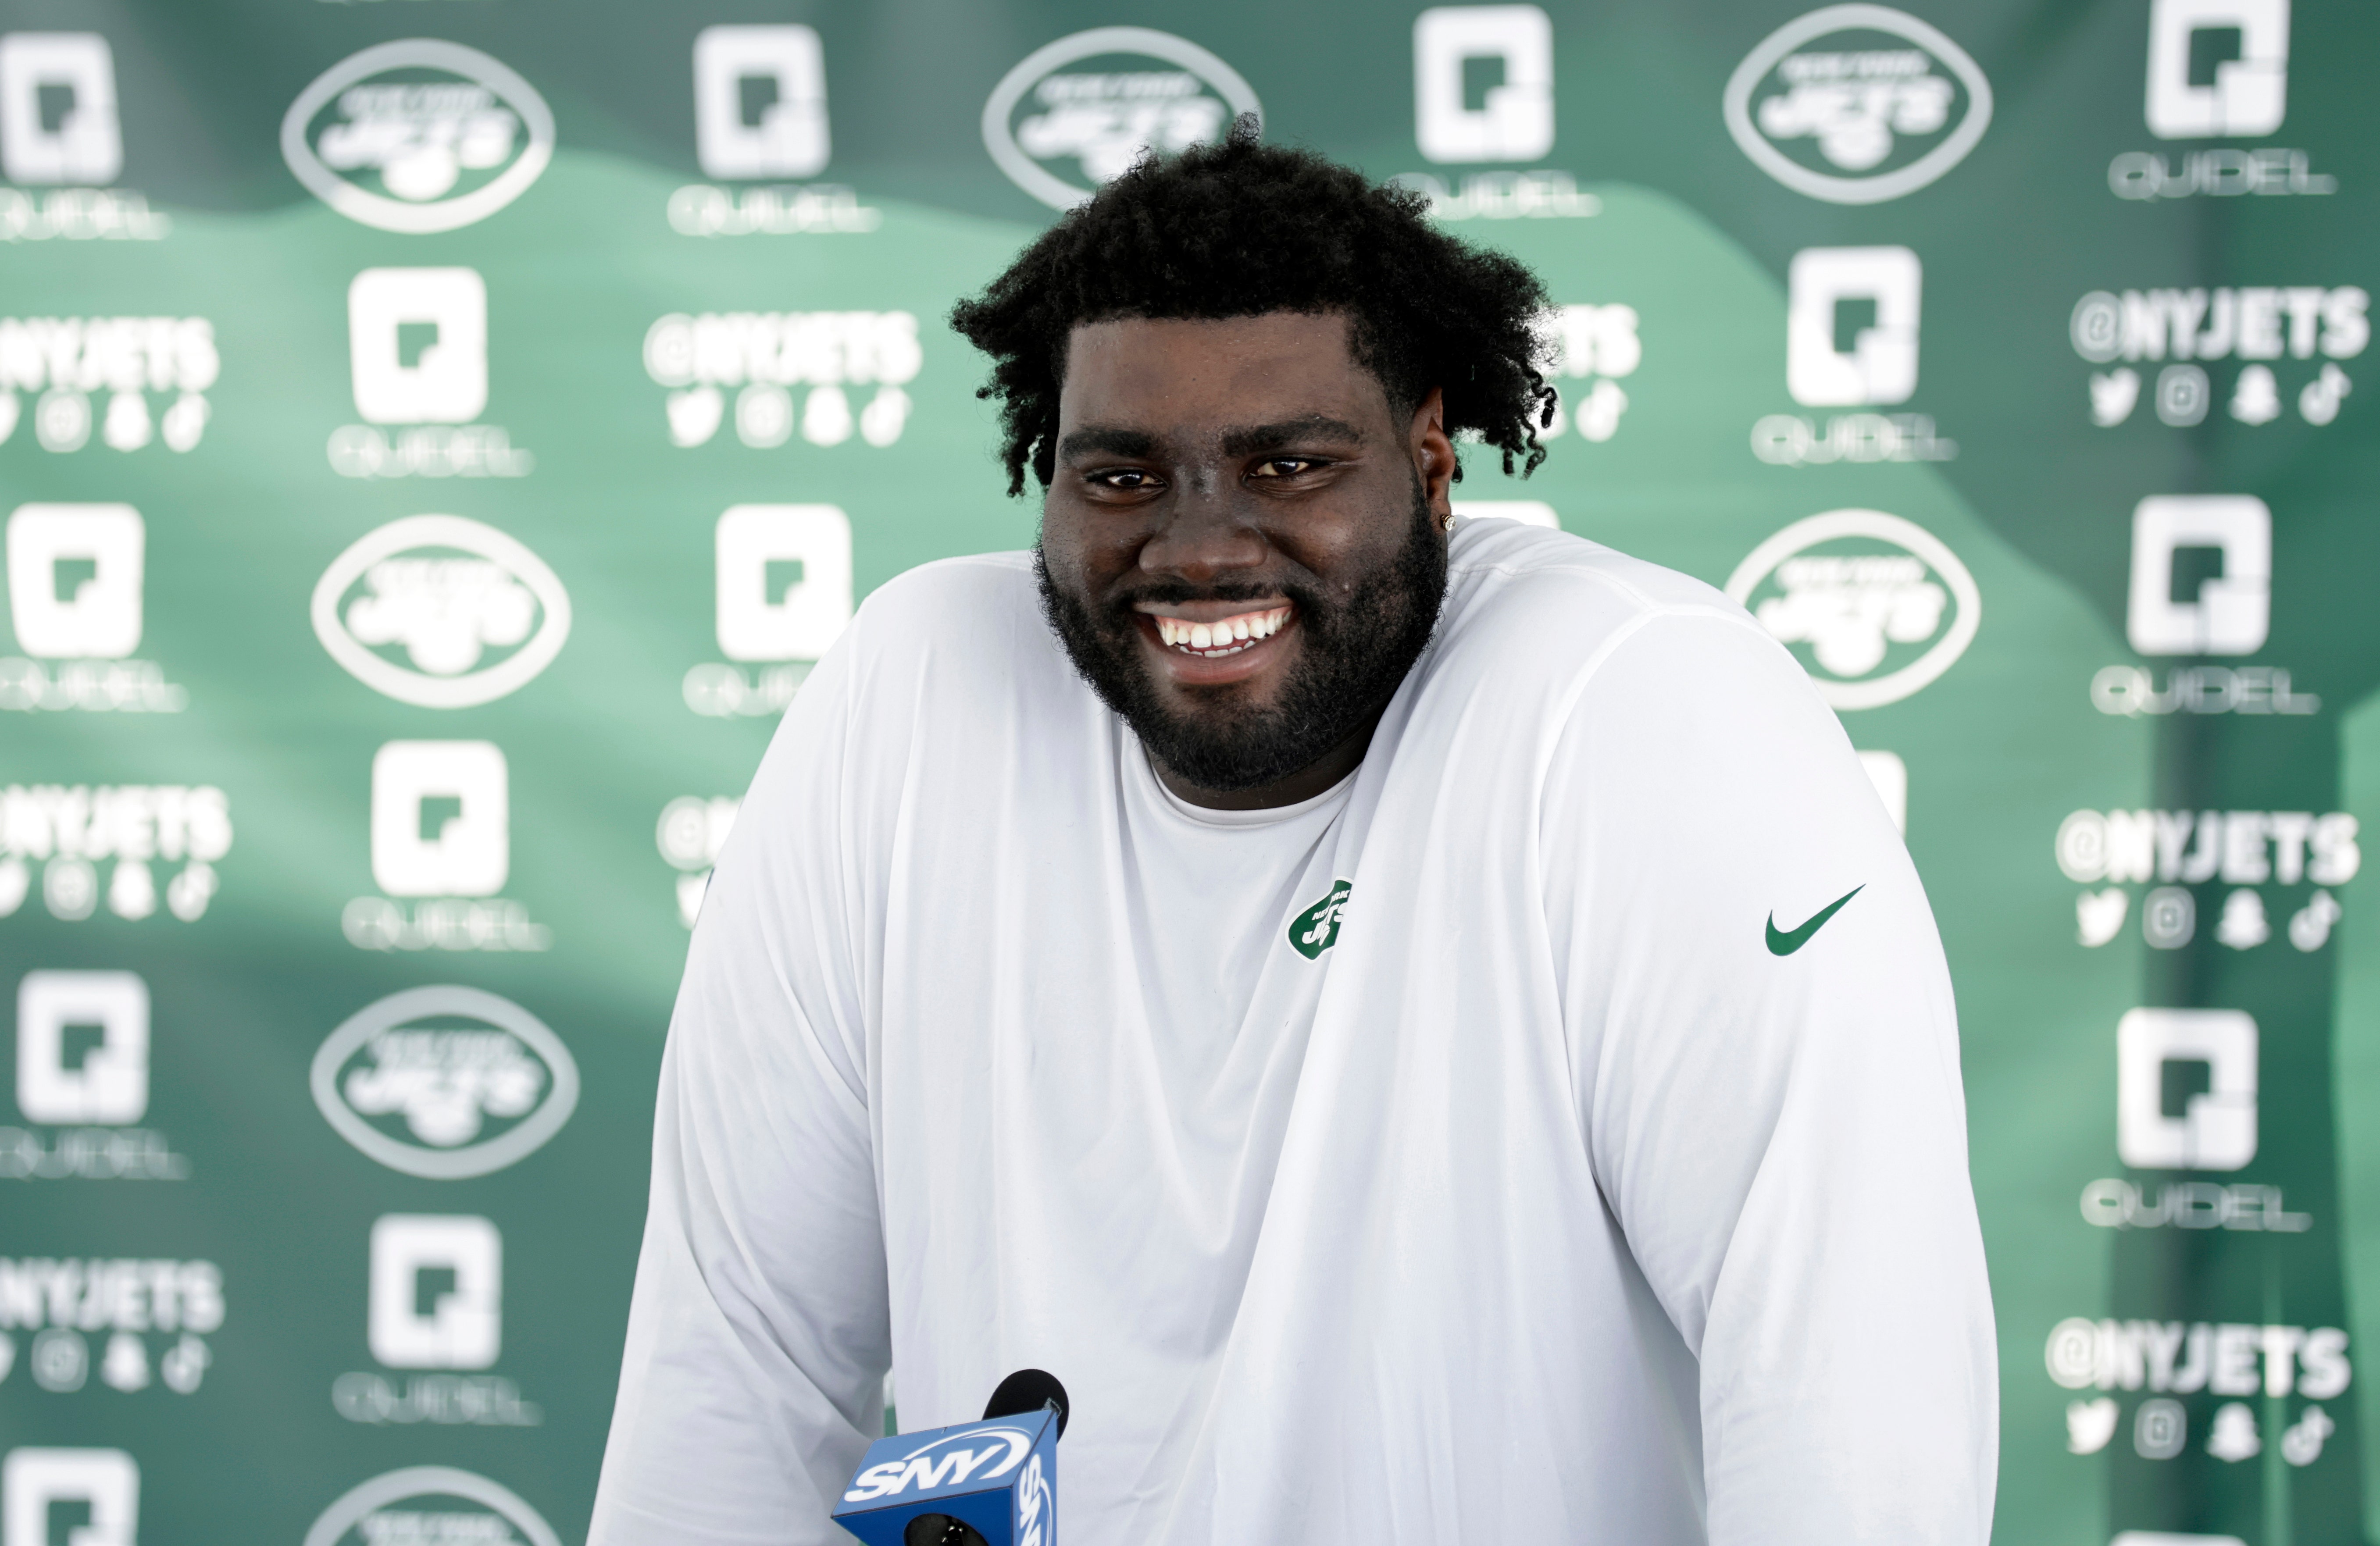 Jets offensive tackle Mekhi Becton is down after appearing to re-injury his right knee.